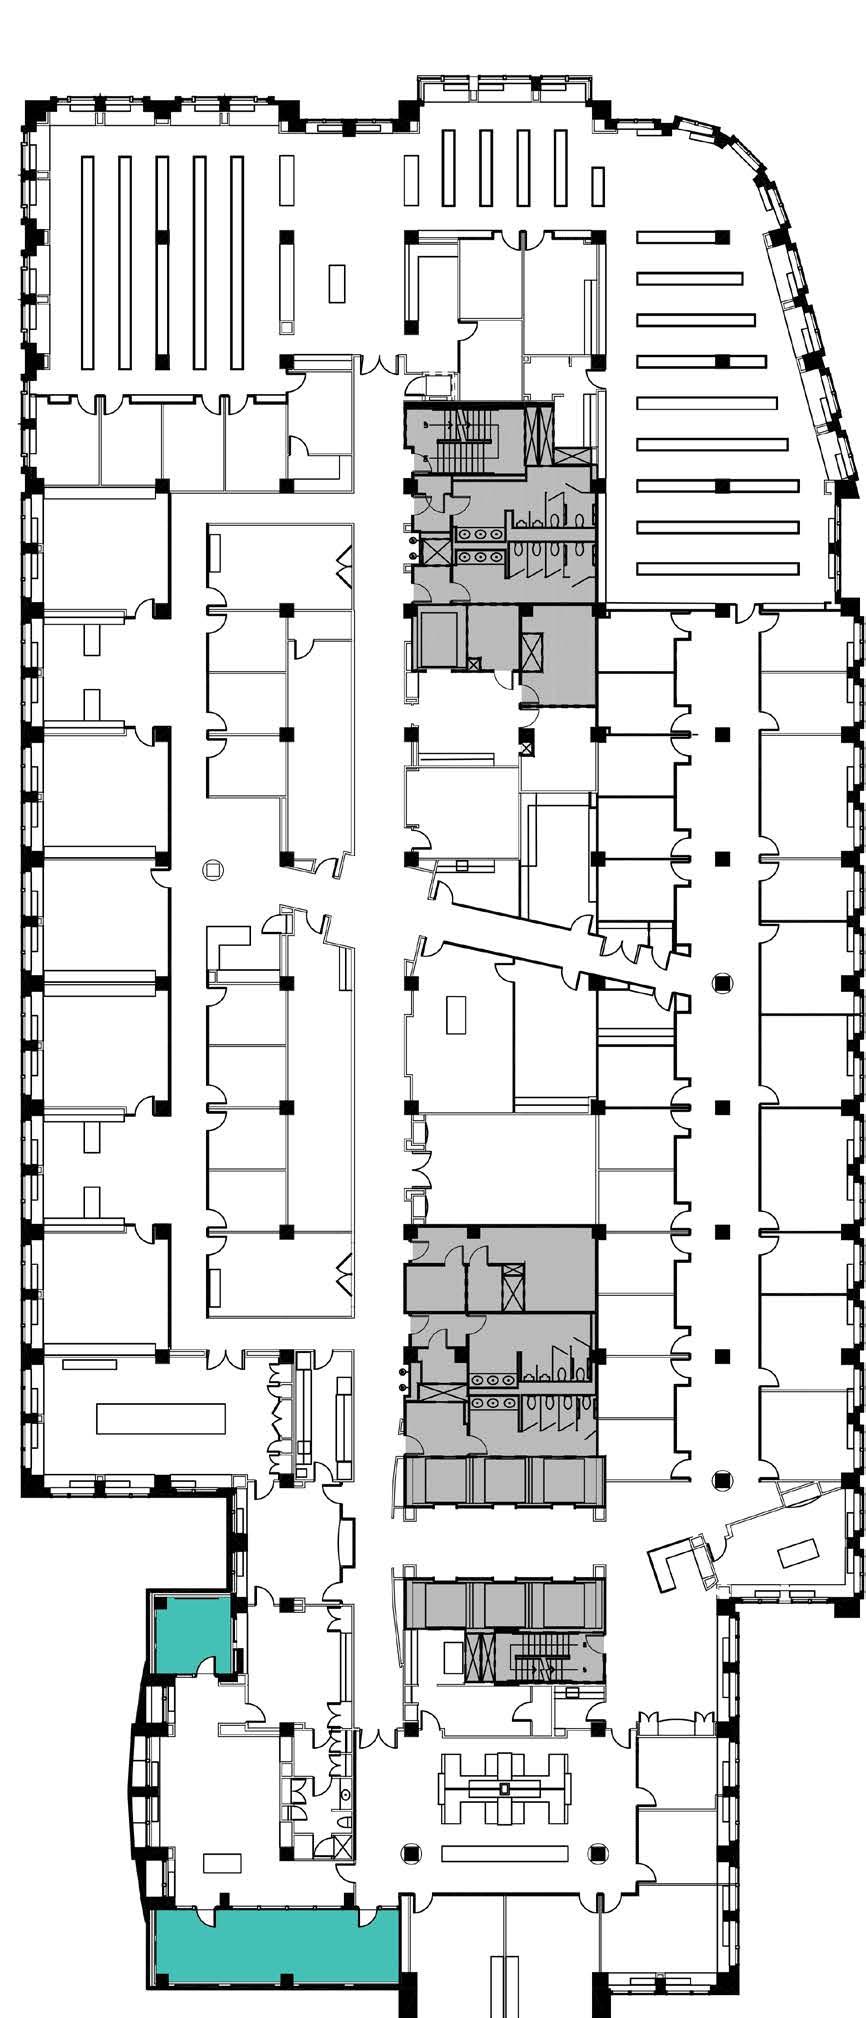 TYPICAL FLOOR PLAN (36,700 RSF) 70 COLUMN FREE 30 30 9TH FLOOR PLAN (with private